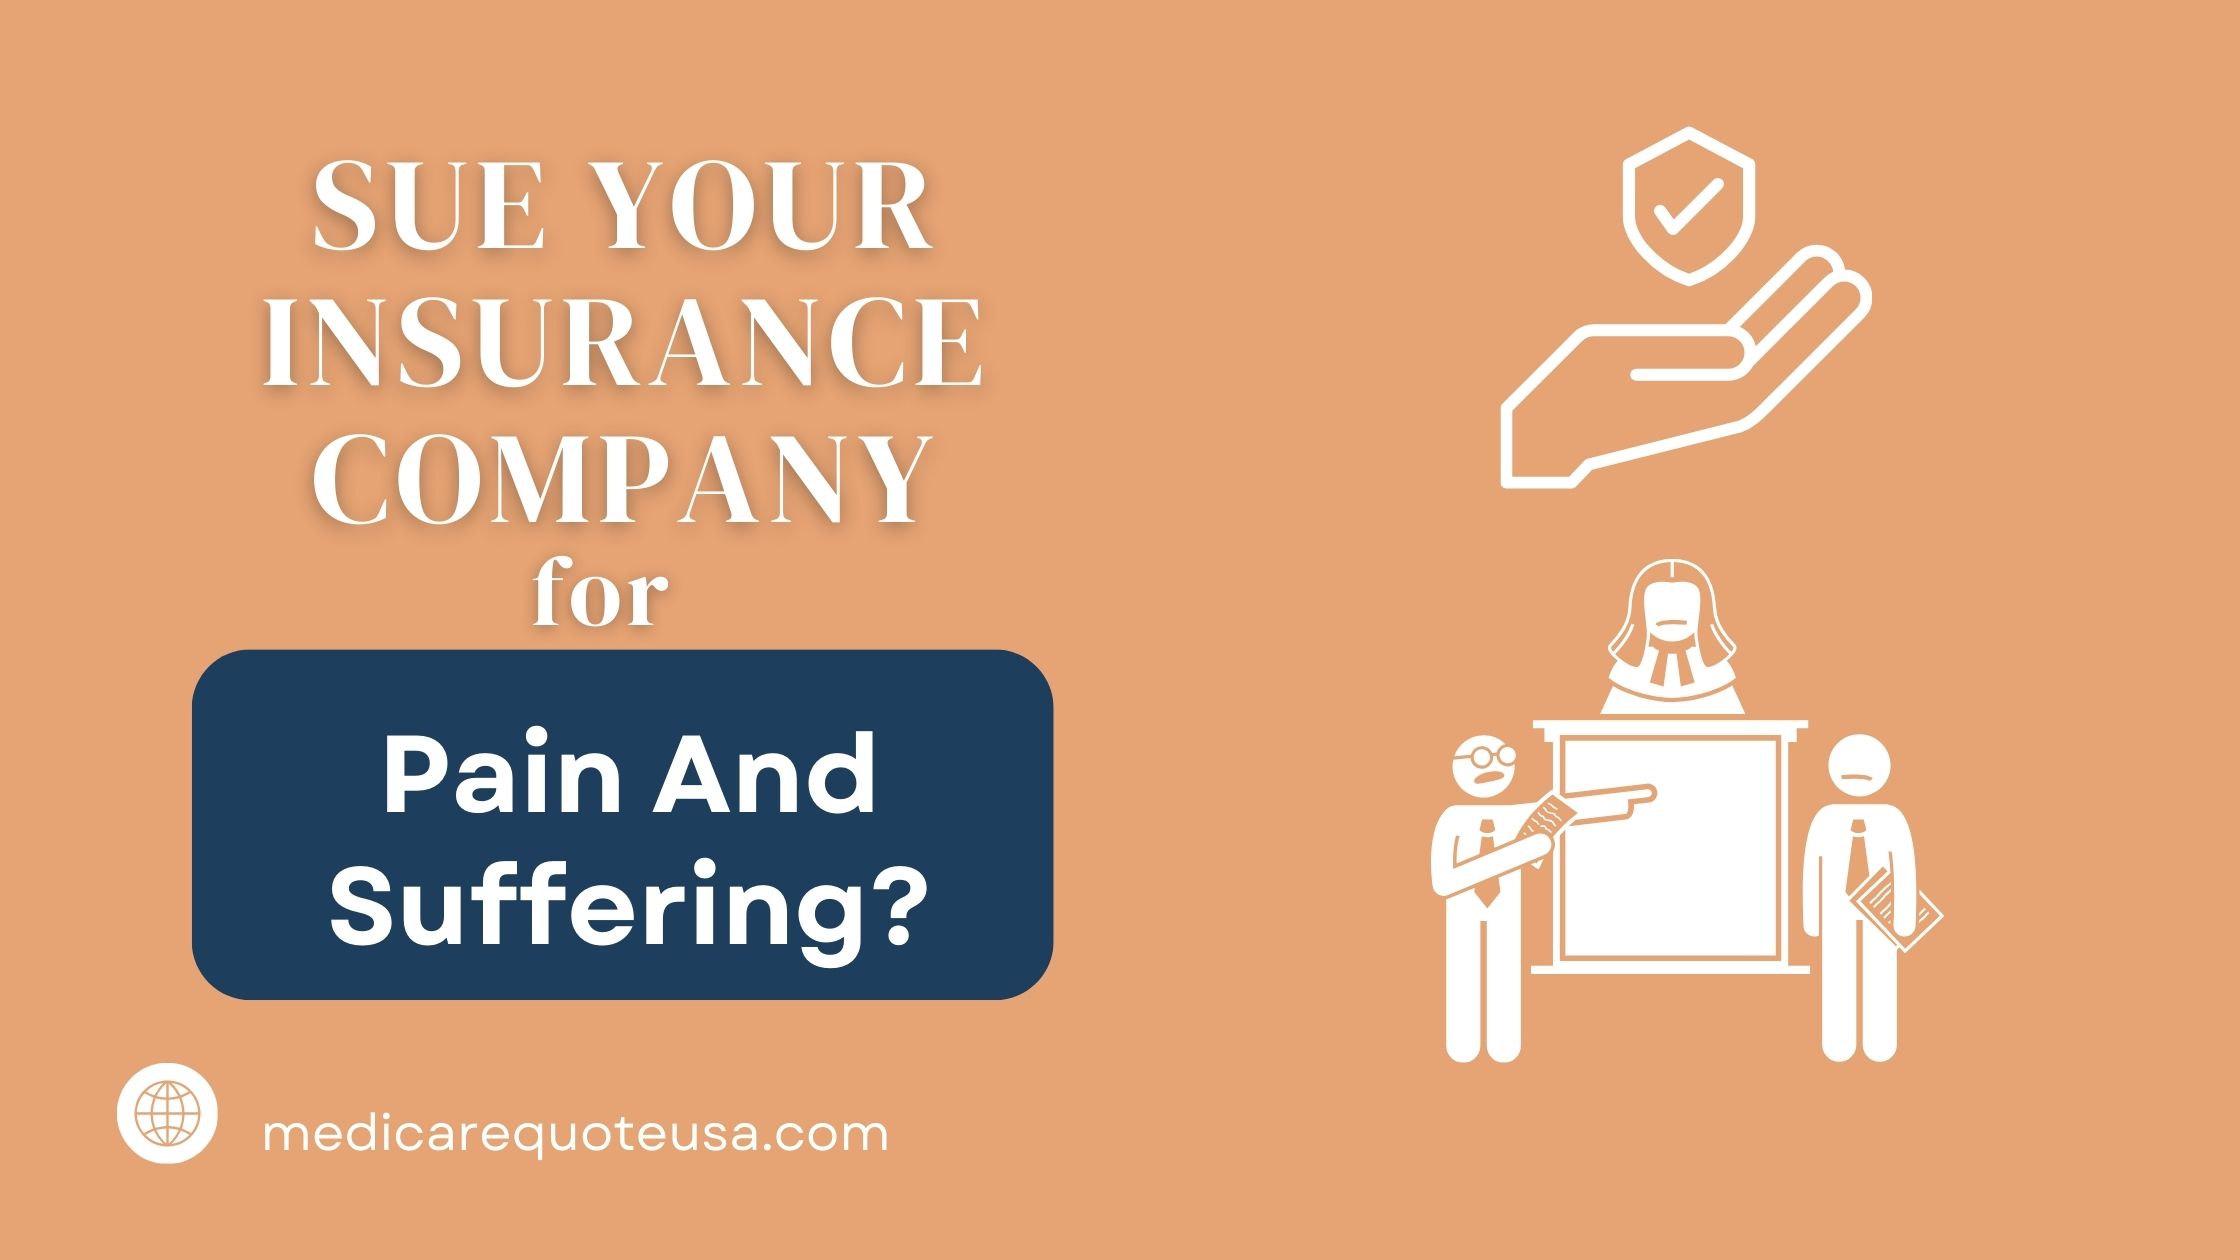 Can you Sue Your Insurance Company For Pain And Suffering in USA